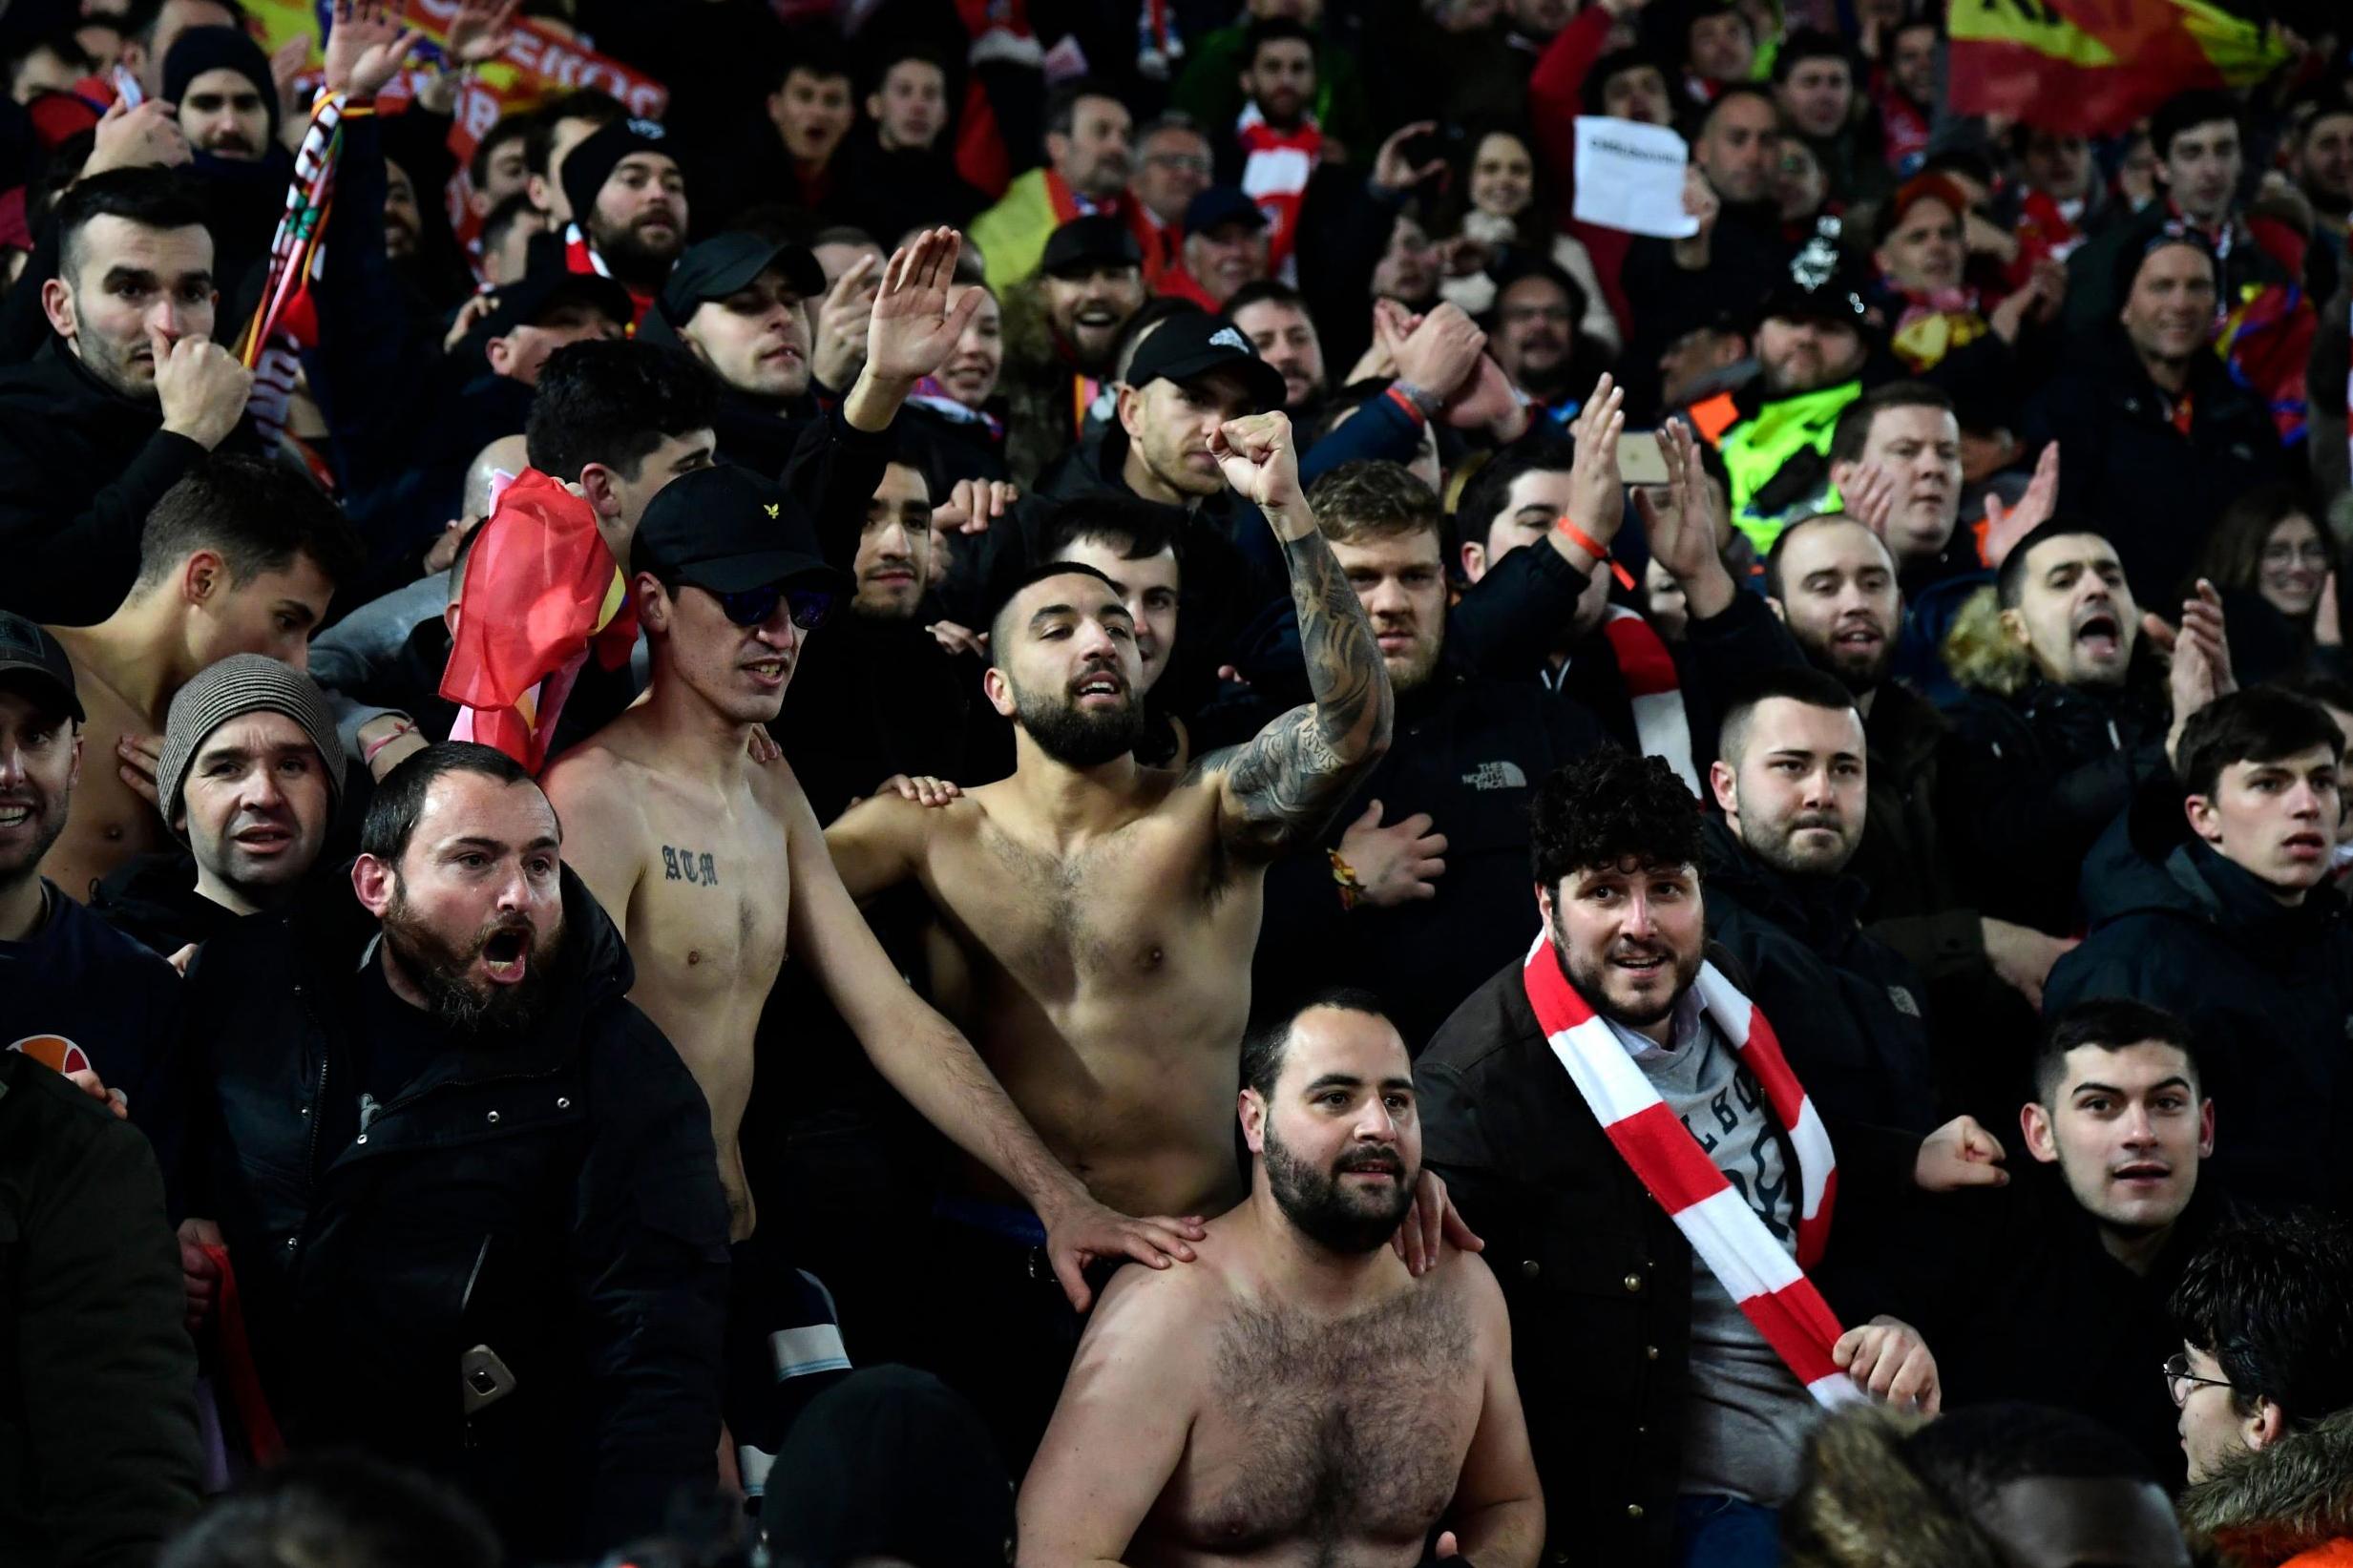 Atletico fans at Liverpool was a 'mistake', claims Madrid mayor amid coronavirus pandemic